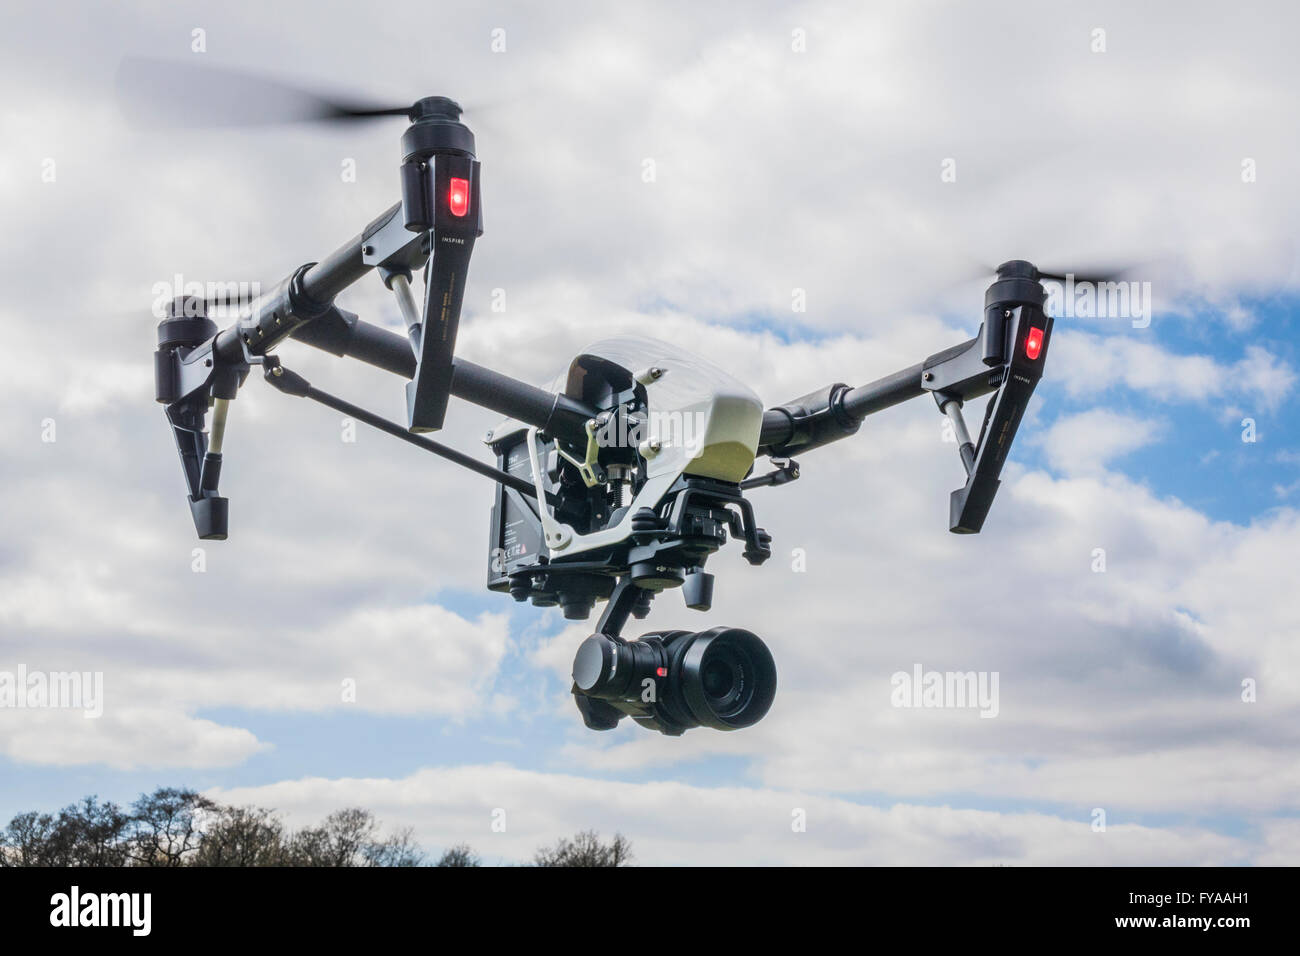 Remotely piloted DJI Inspire drone in flight Stock Photo